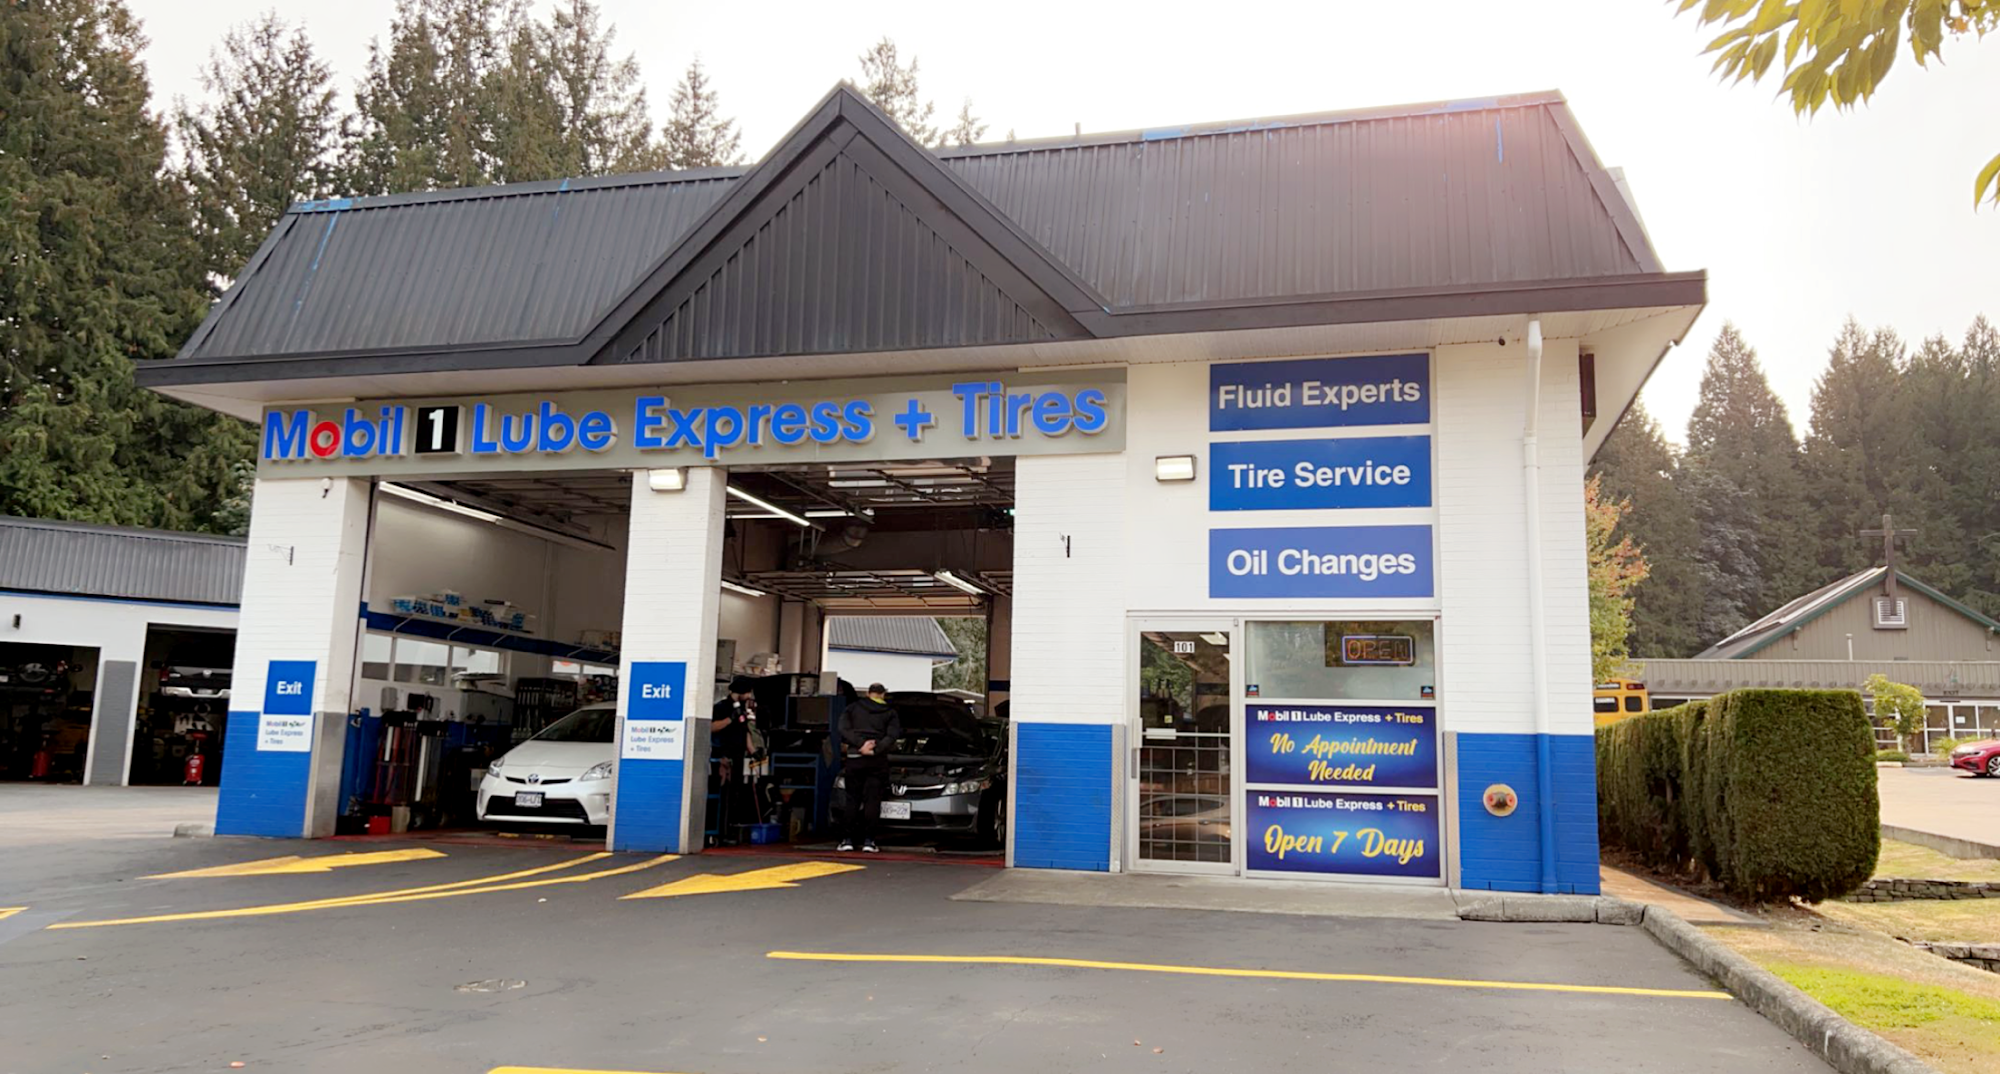 Mobil 1 Lube Express + Tires